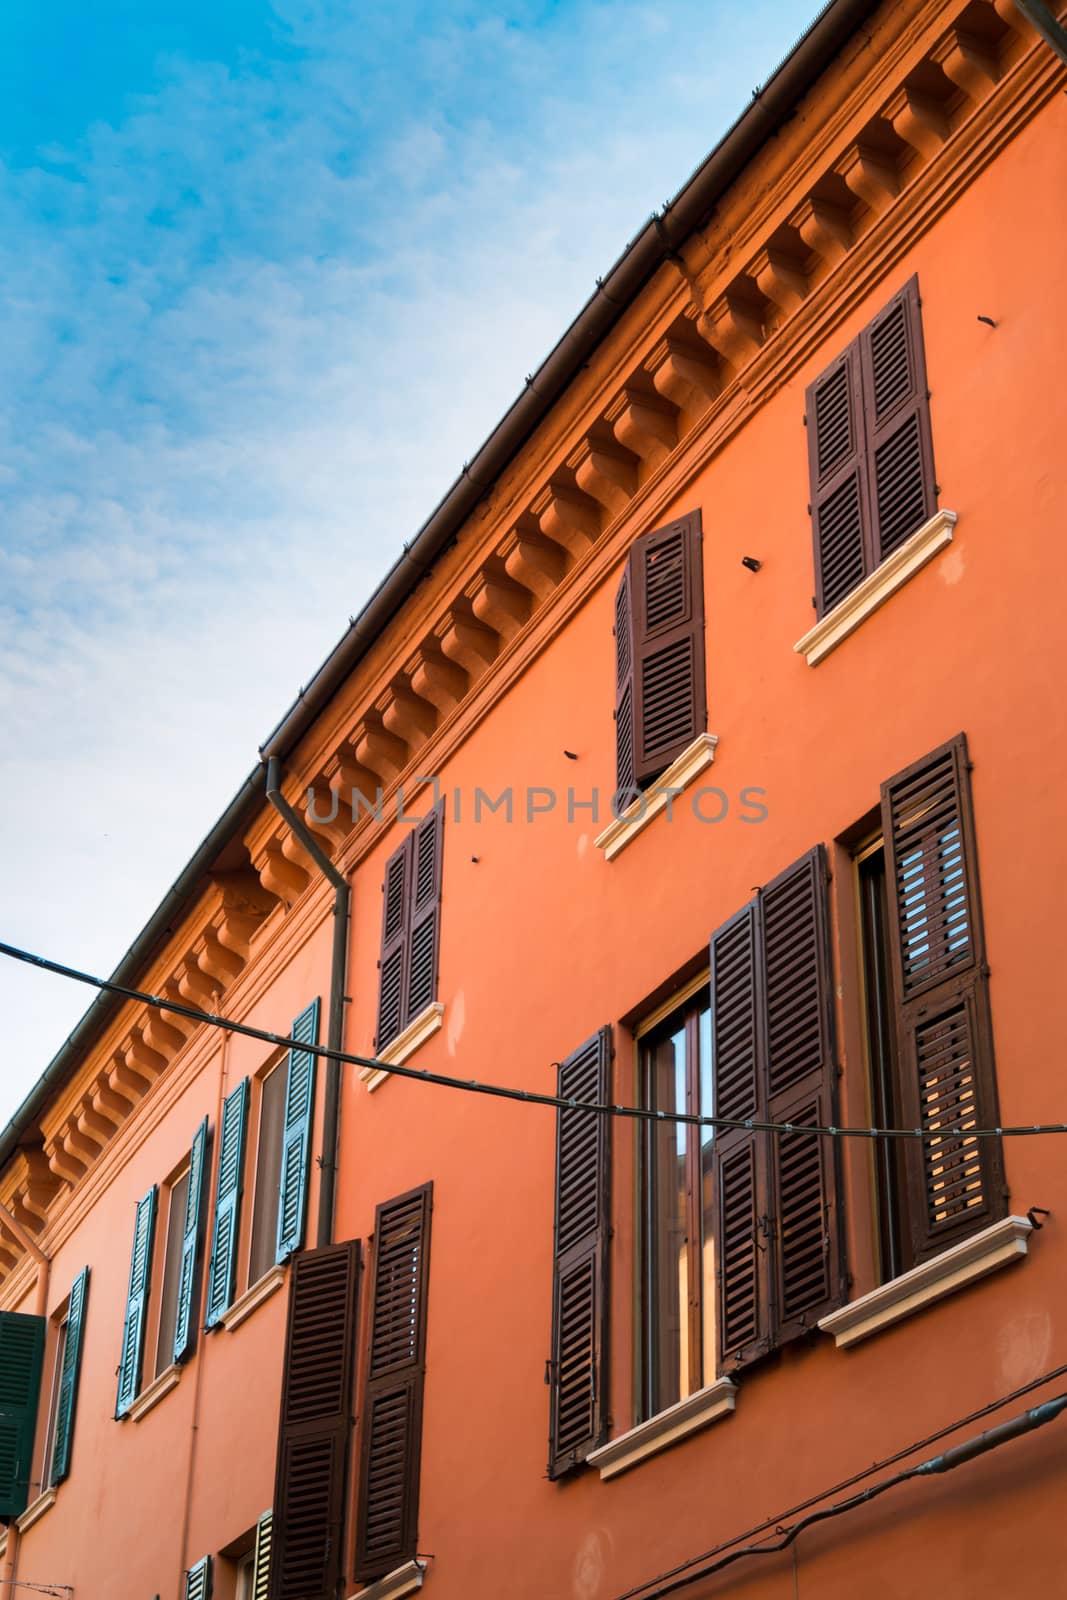 View of an historic building in Italy by enrico.lapponi